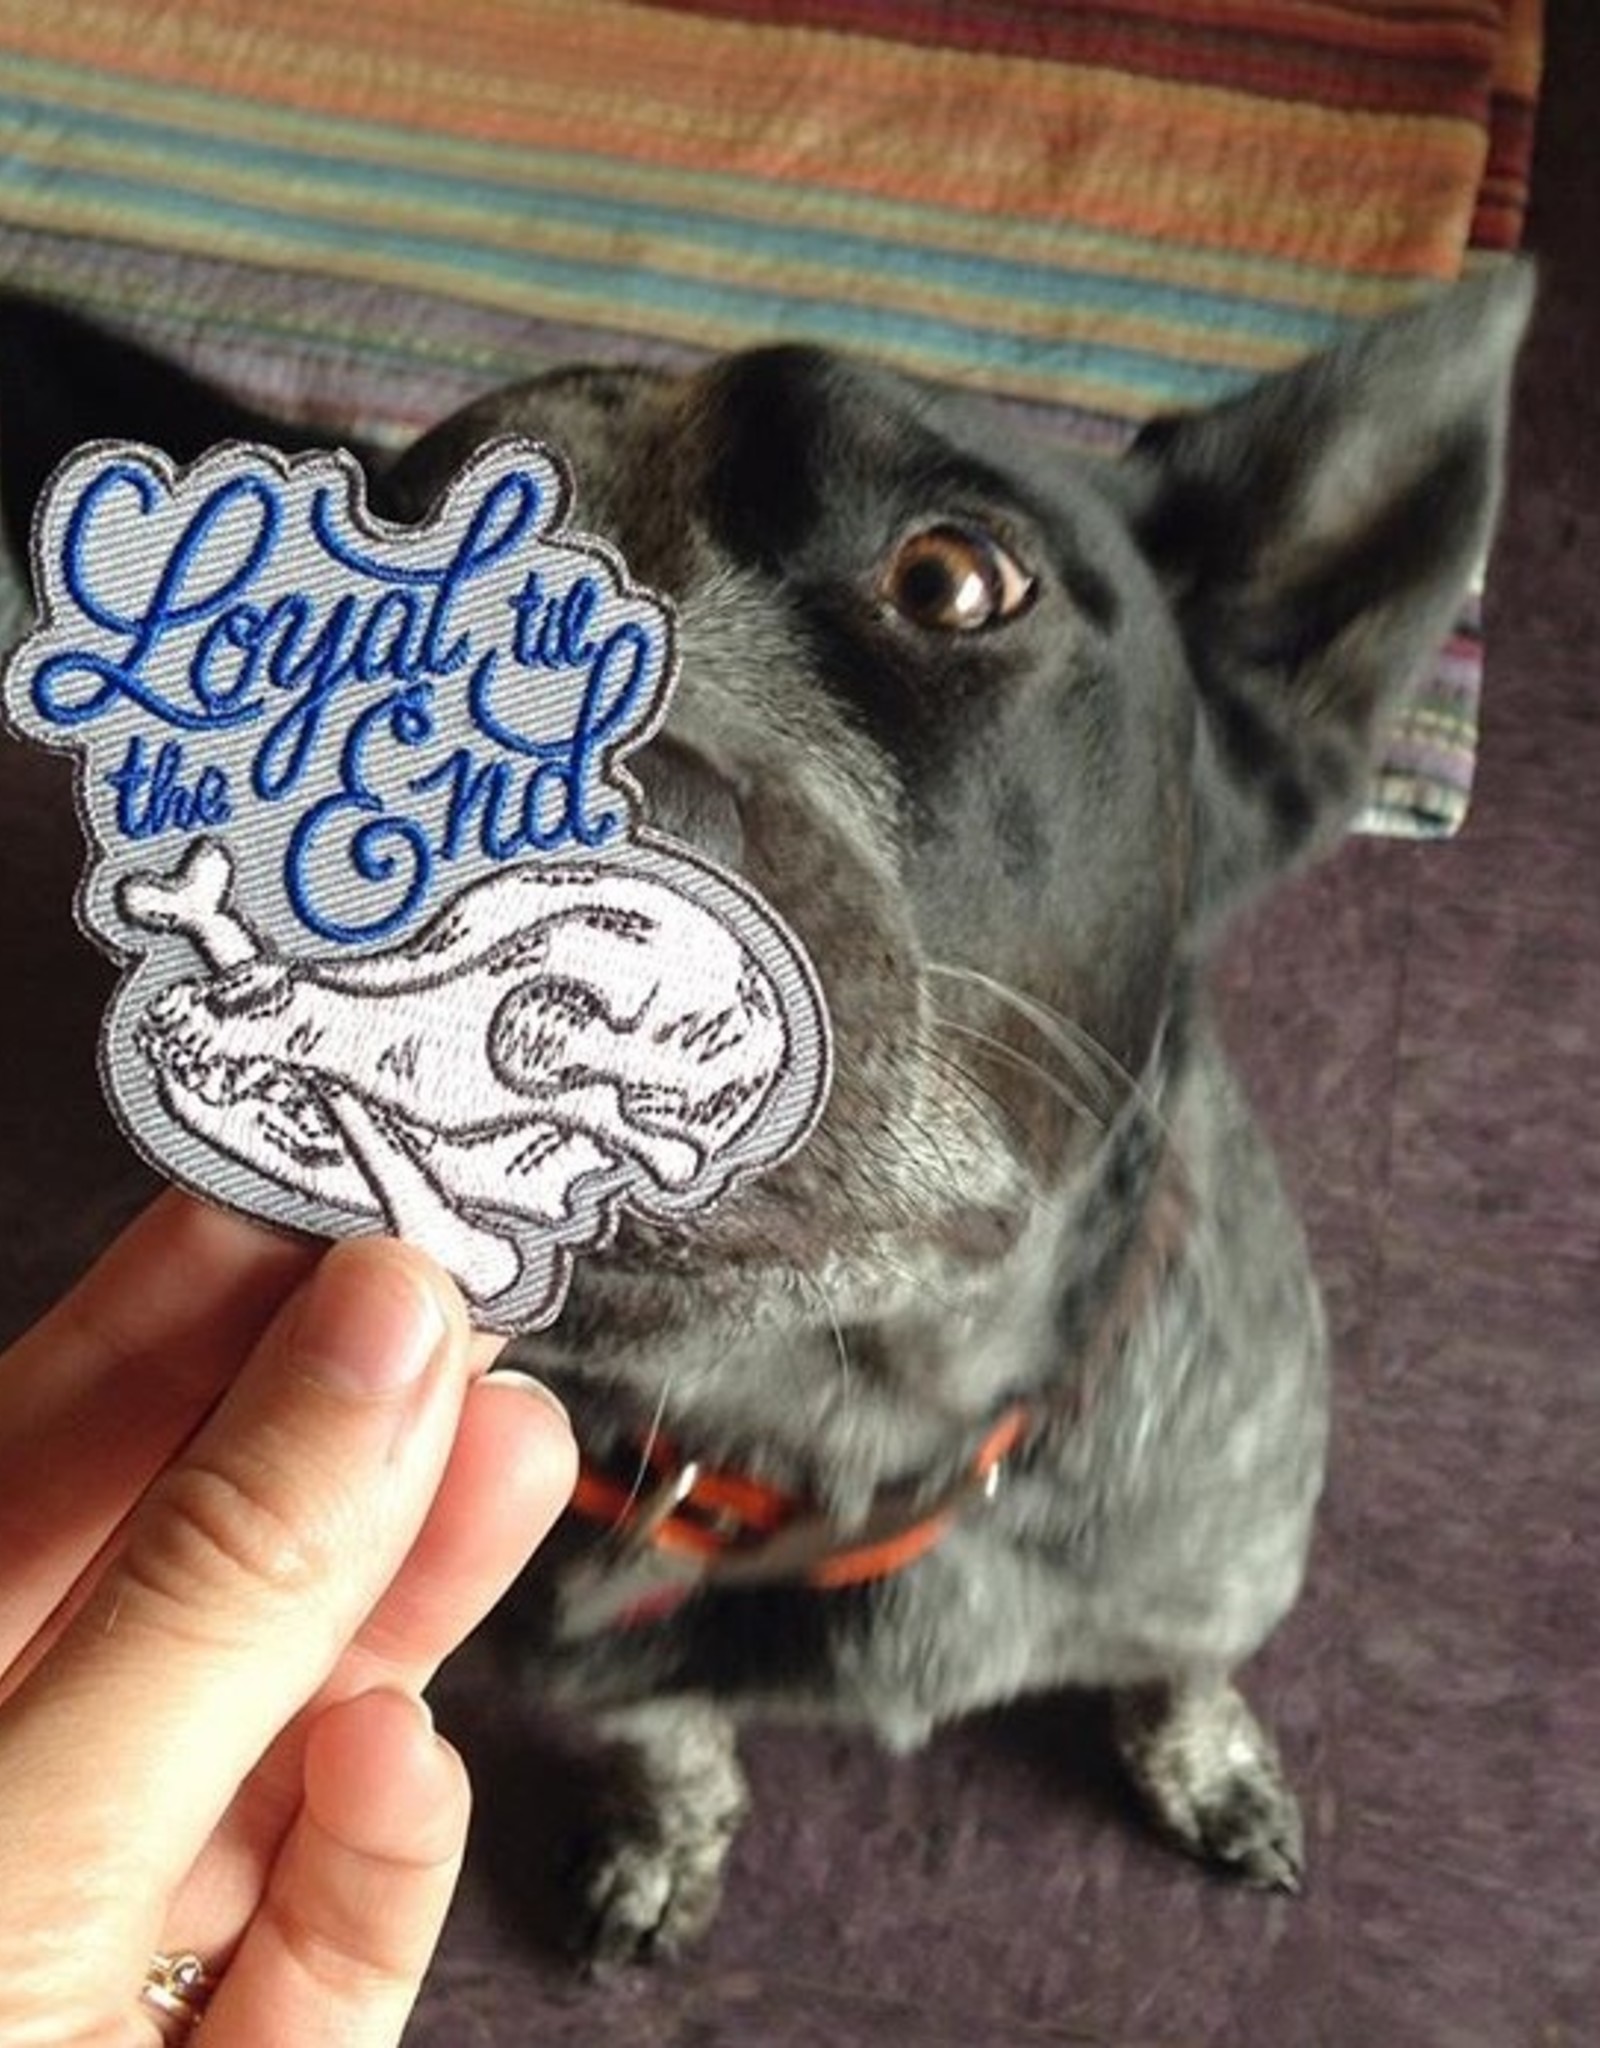 Loyal Til The End Dog Patch (glow in the dark!)